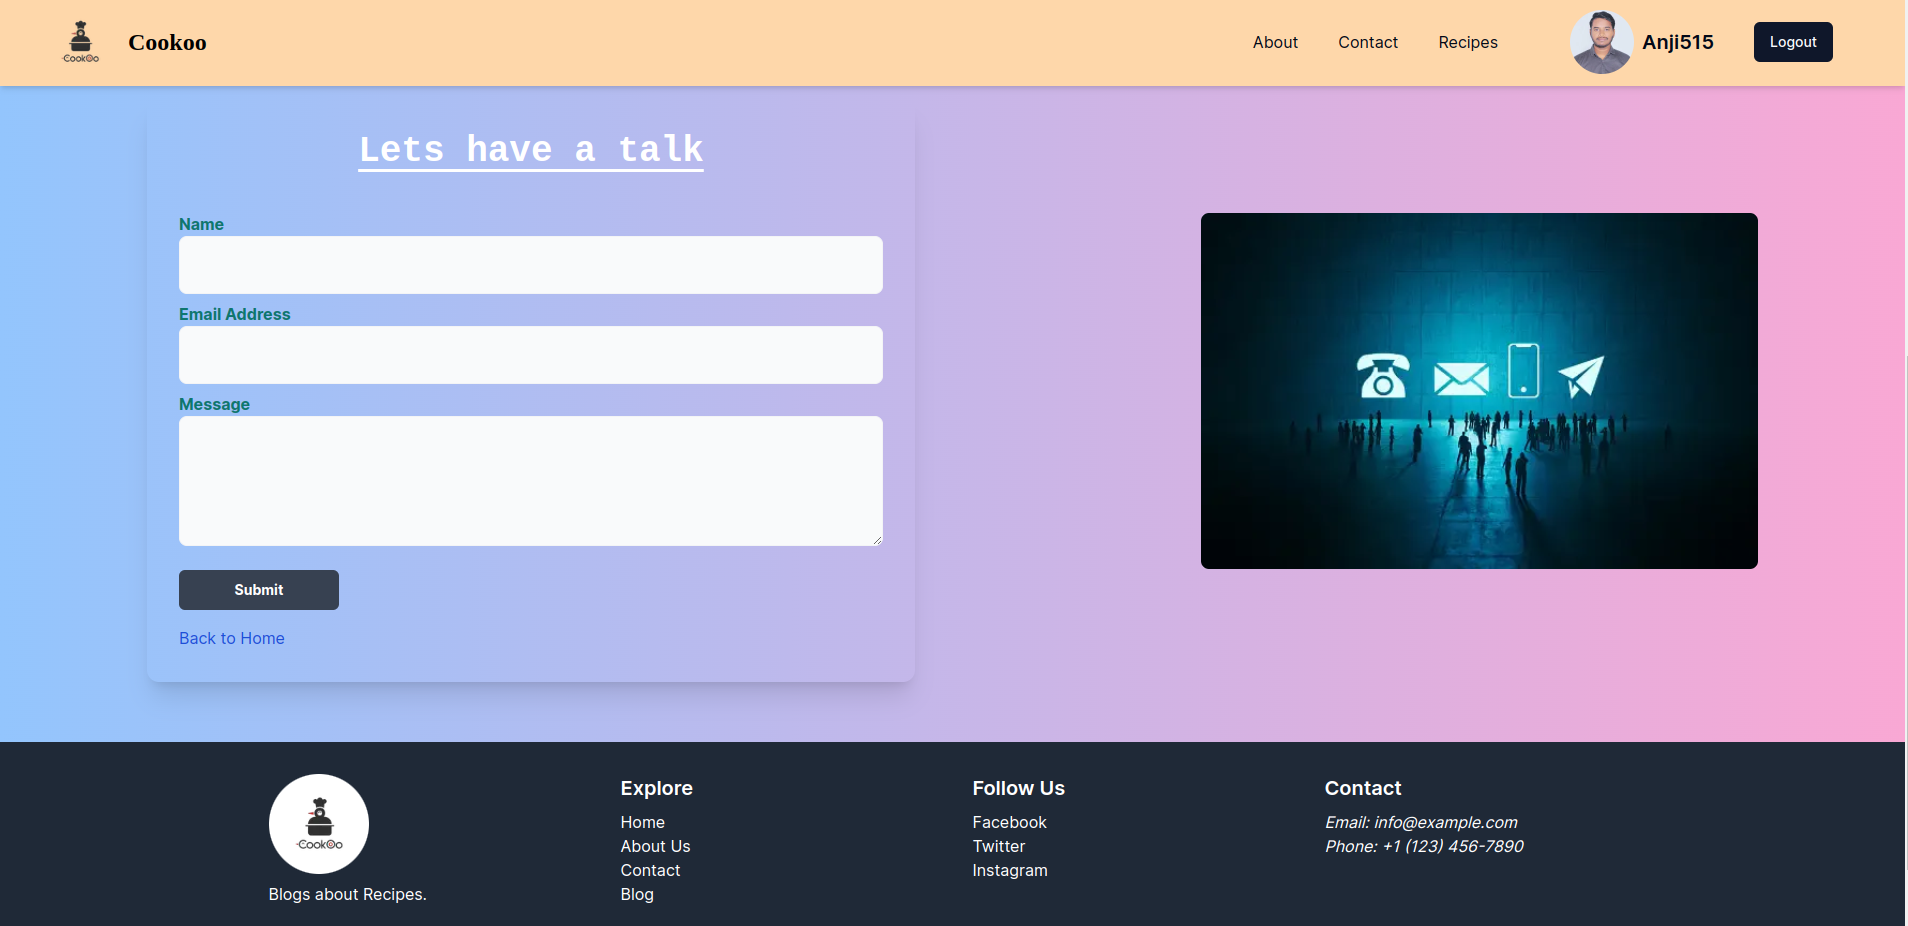 The Contact page